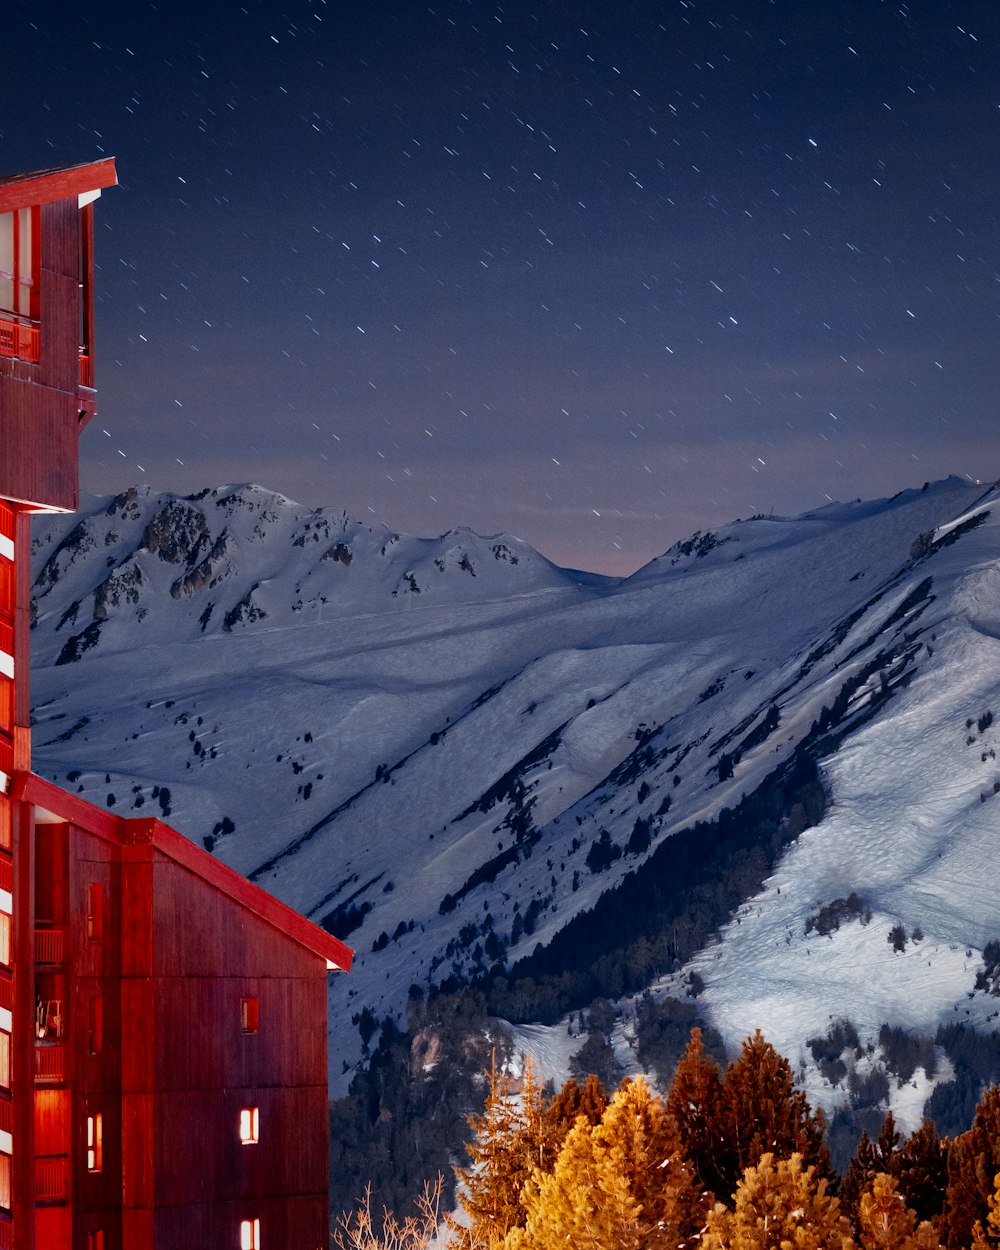 a tall red building sitting on the side of a snow covered mountain